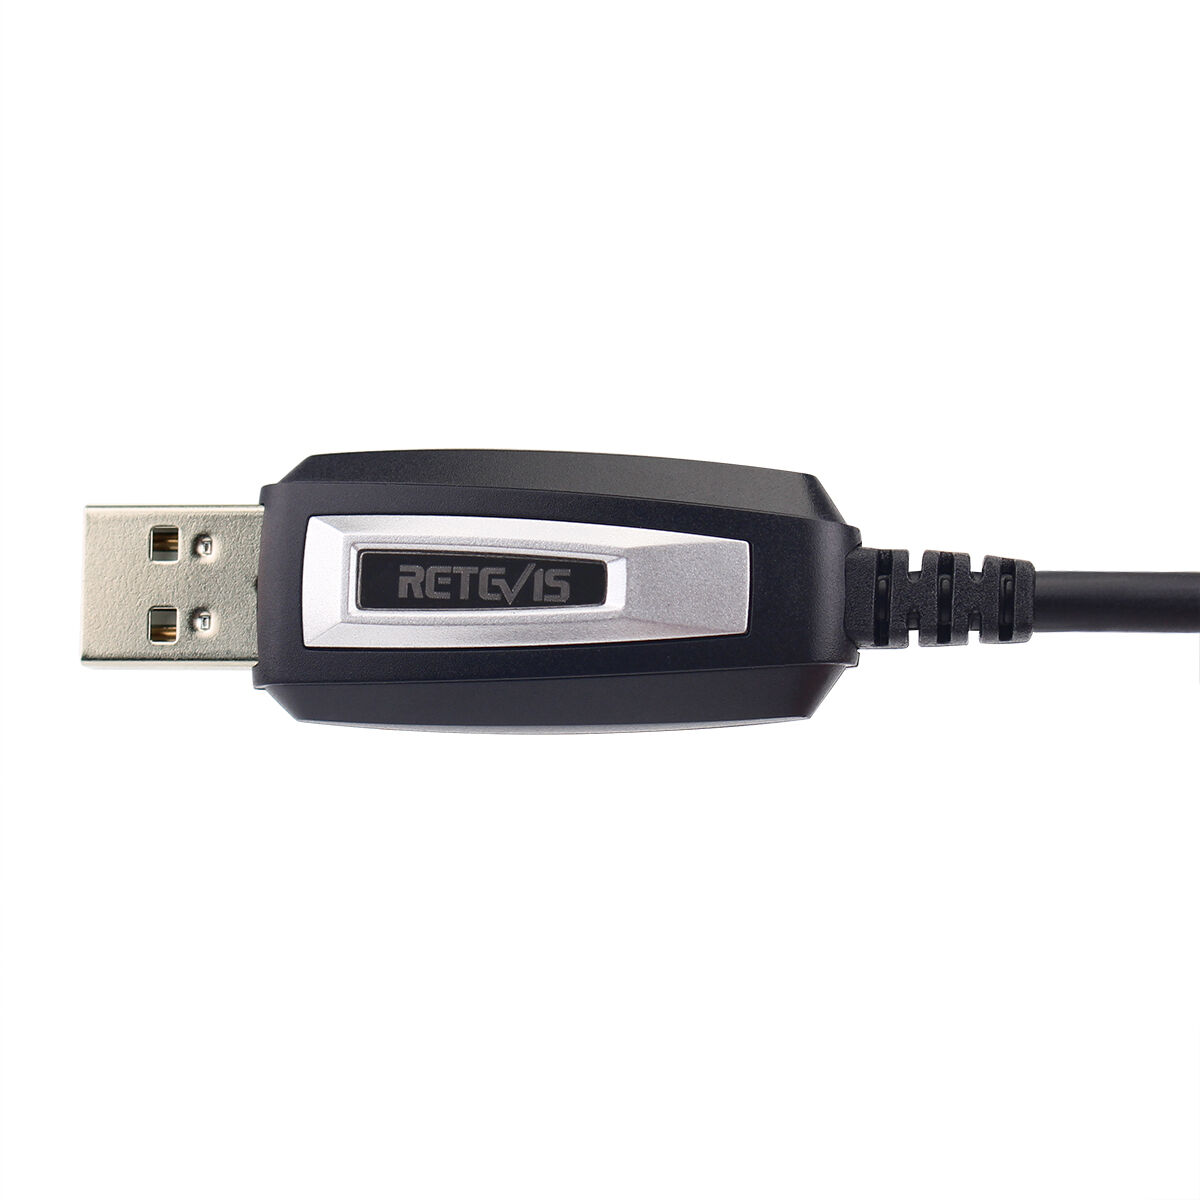 Retevis USB Programming Cable for Kenwood 2-Pin Radios